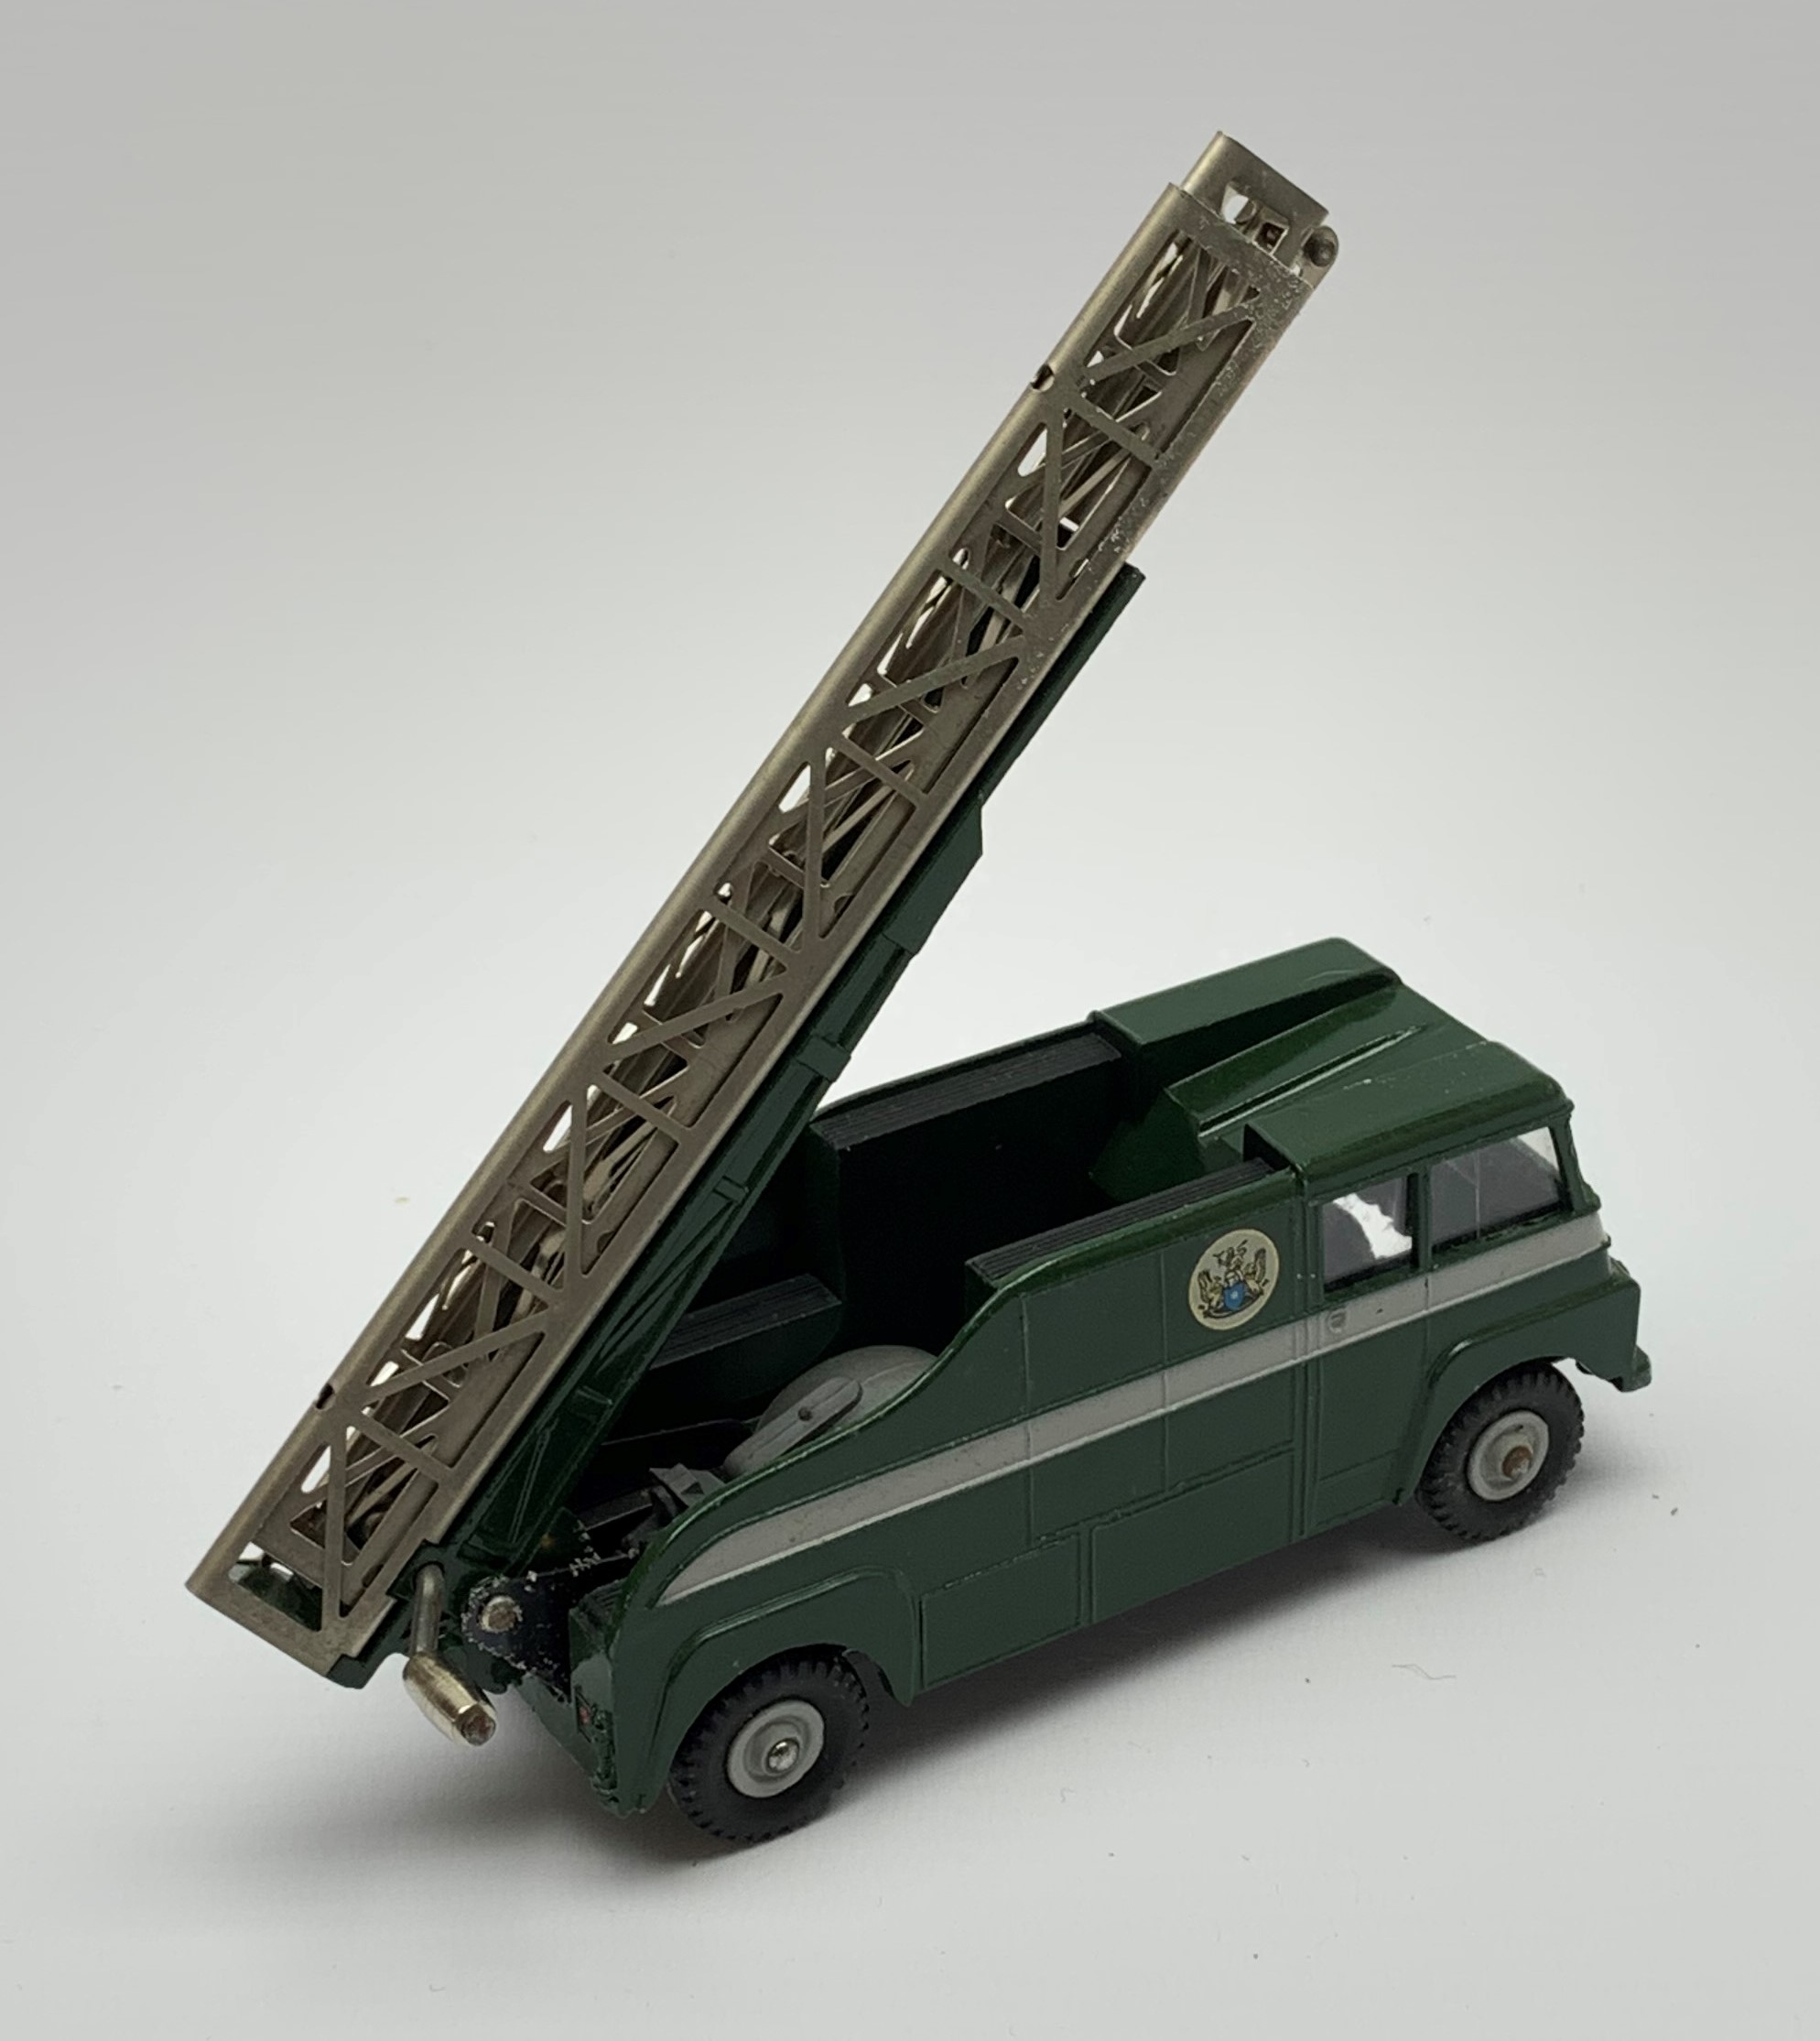 Dinky - Supertoys B.B.C. T.V. Extending Mast Vehicle, No.969, boxed with internal packaging and ins - Image 6 of 8